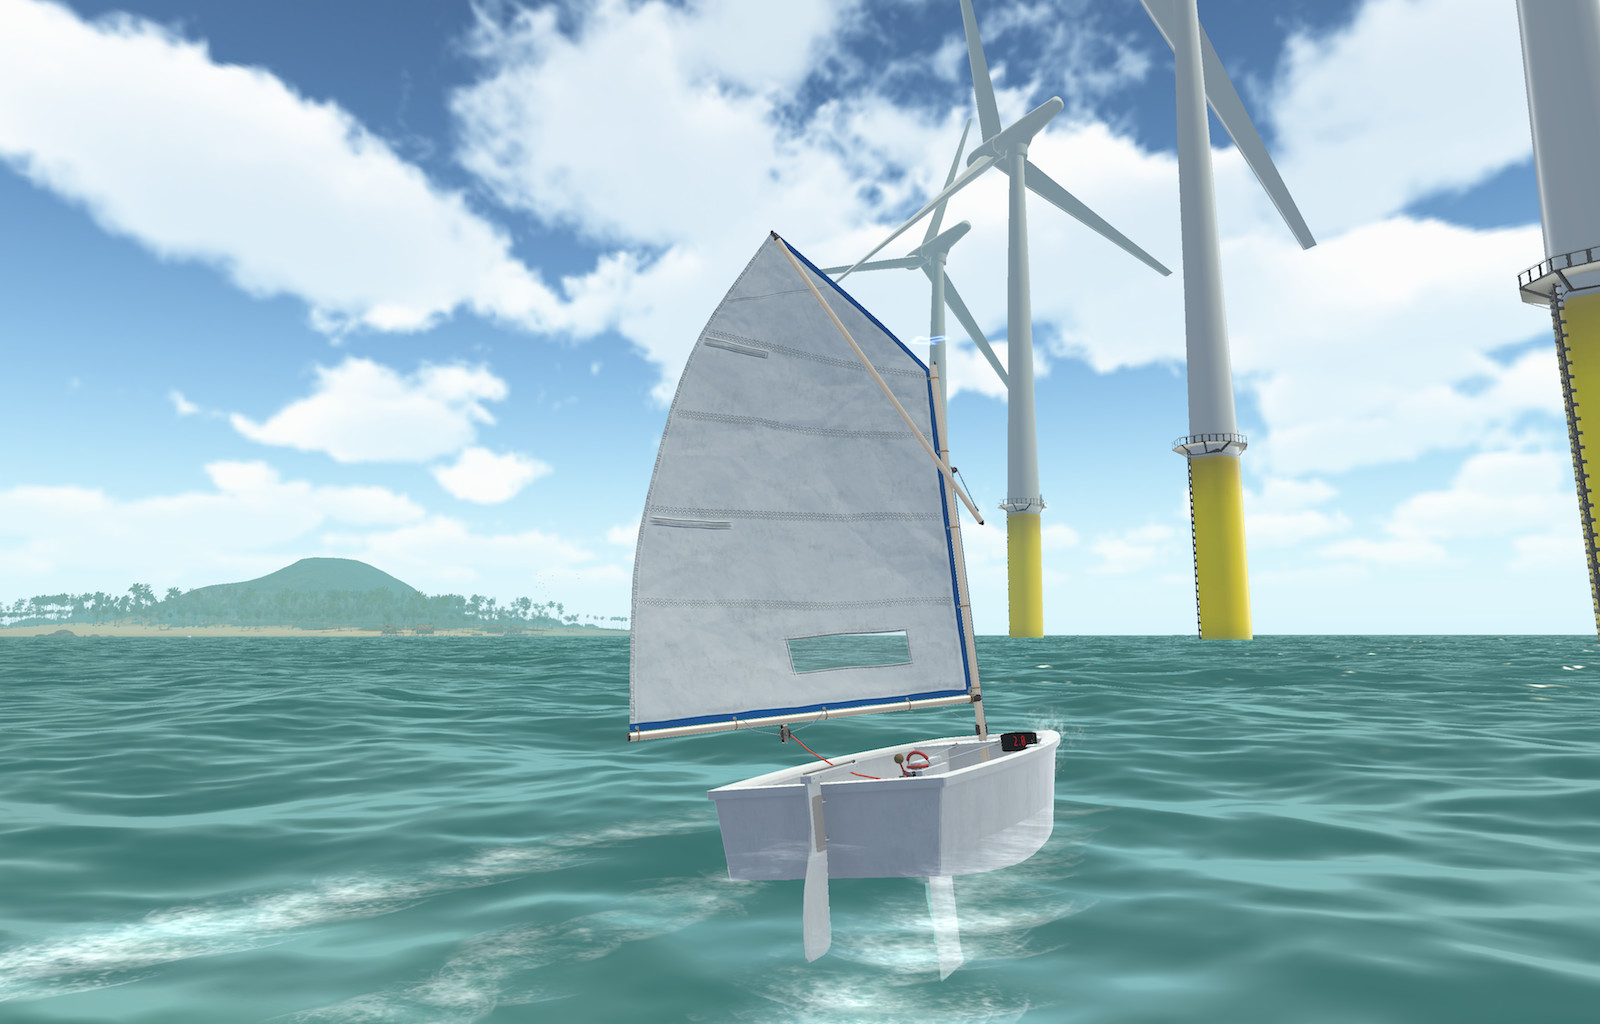 Sailing Era for android download